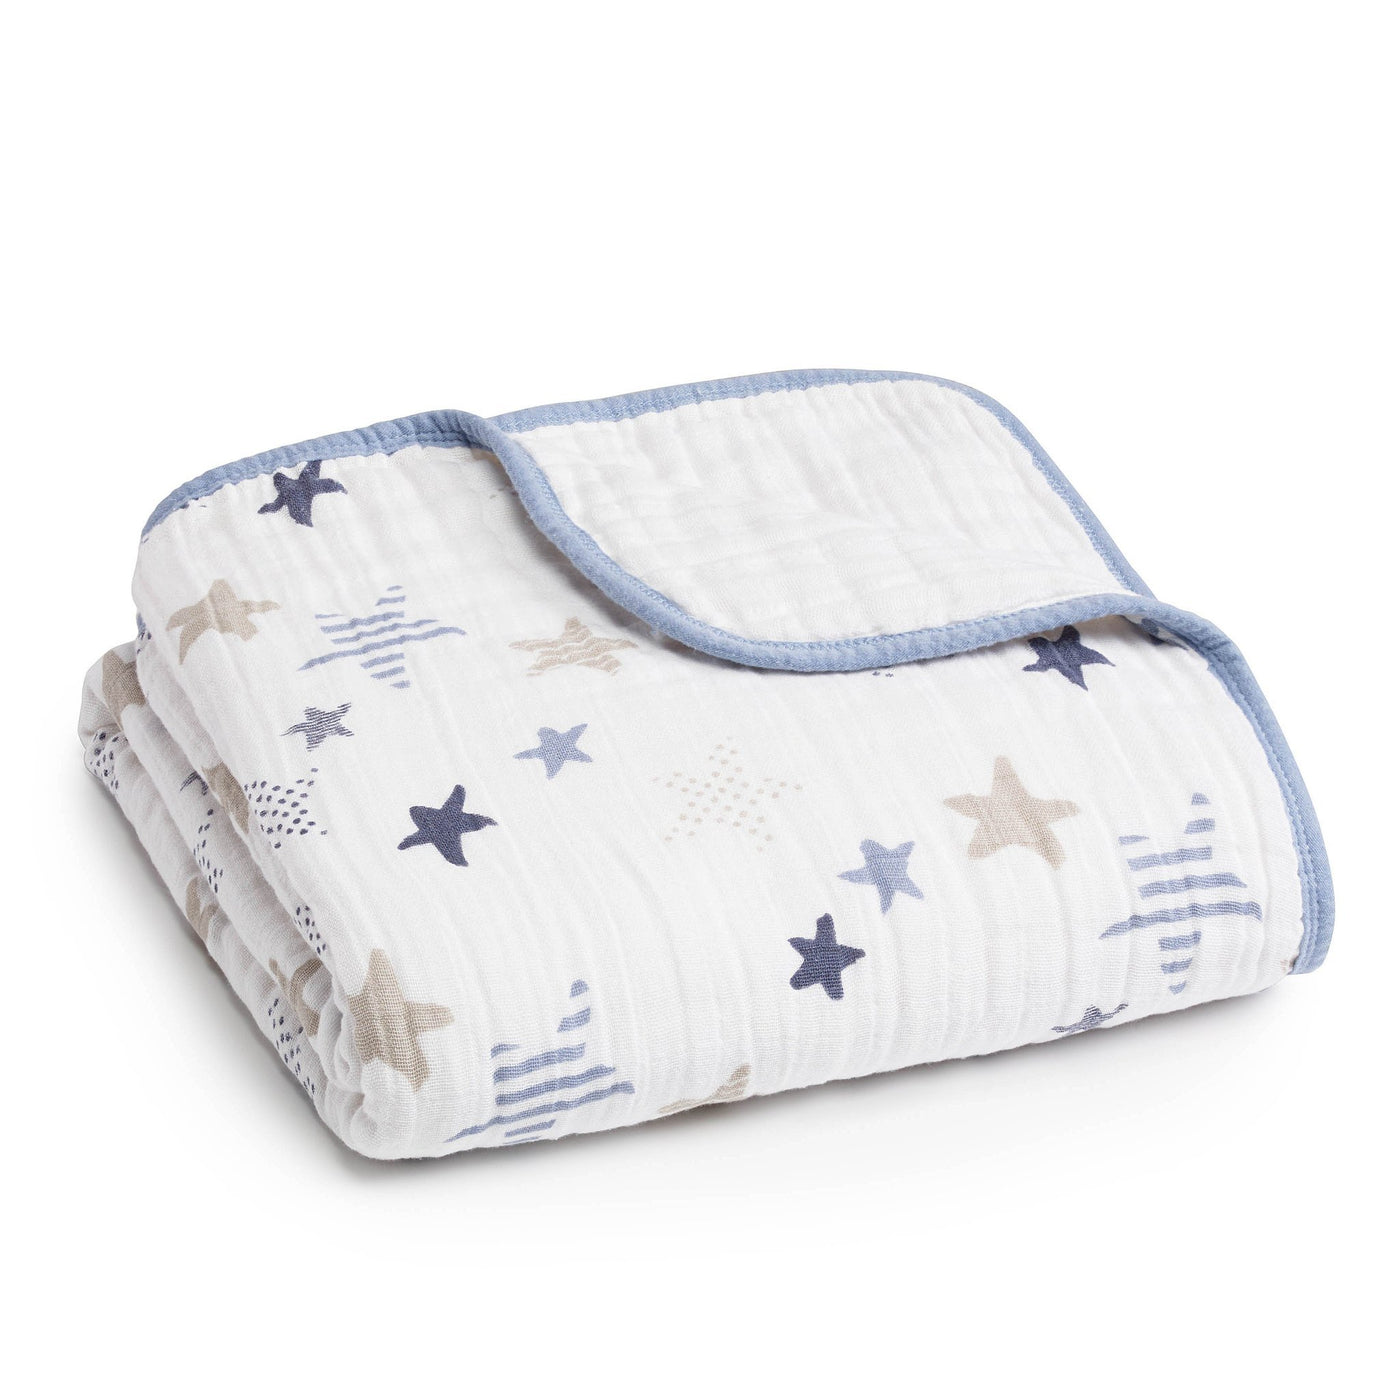 Aden and Anais Classic Dream Blanket - Rock Star-Outlet Shop For Kids